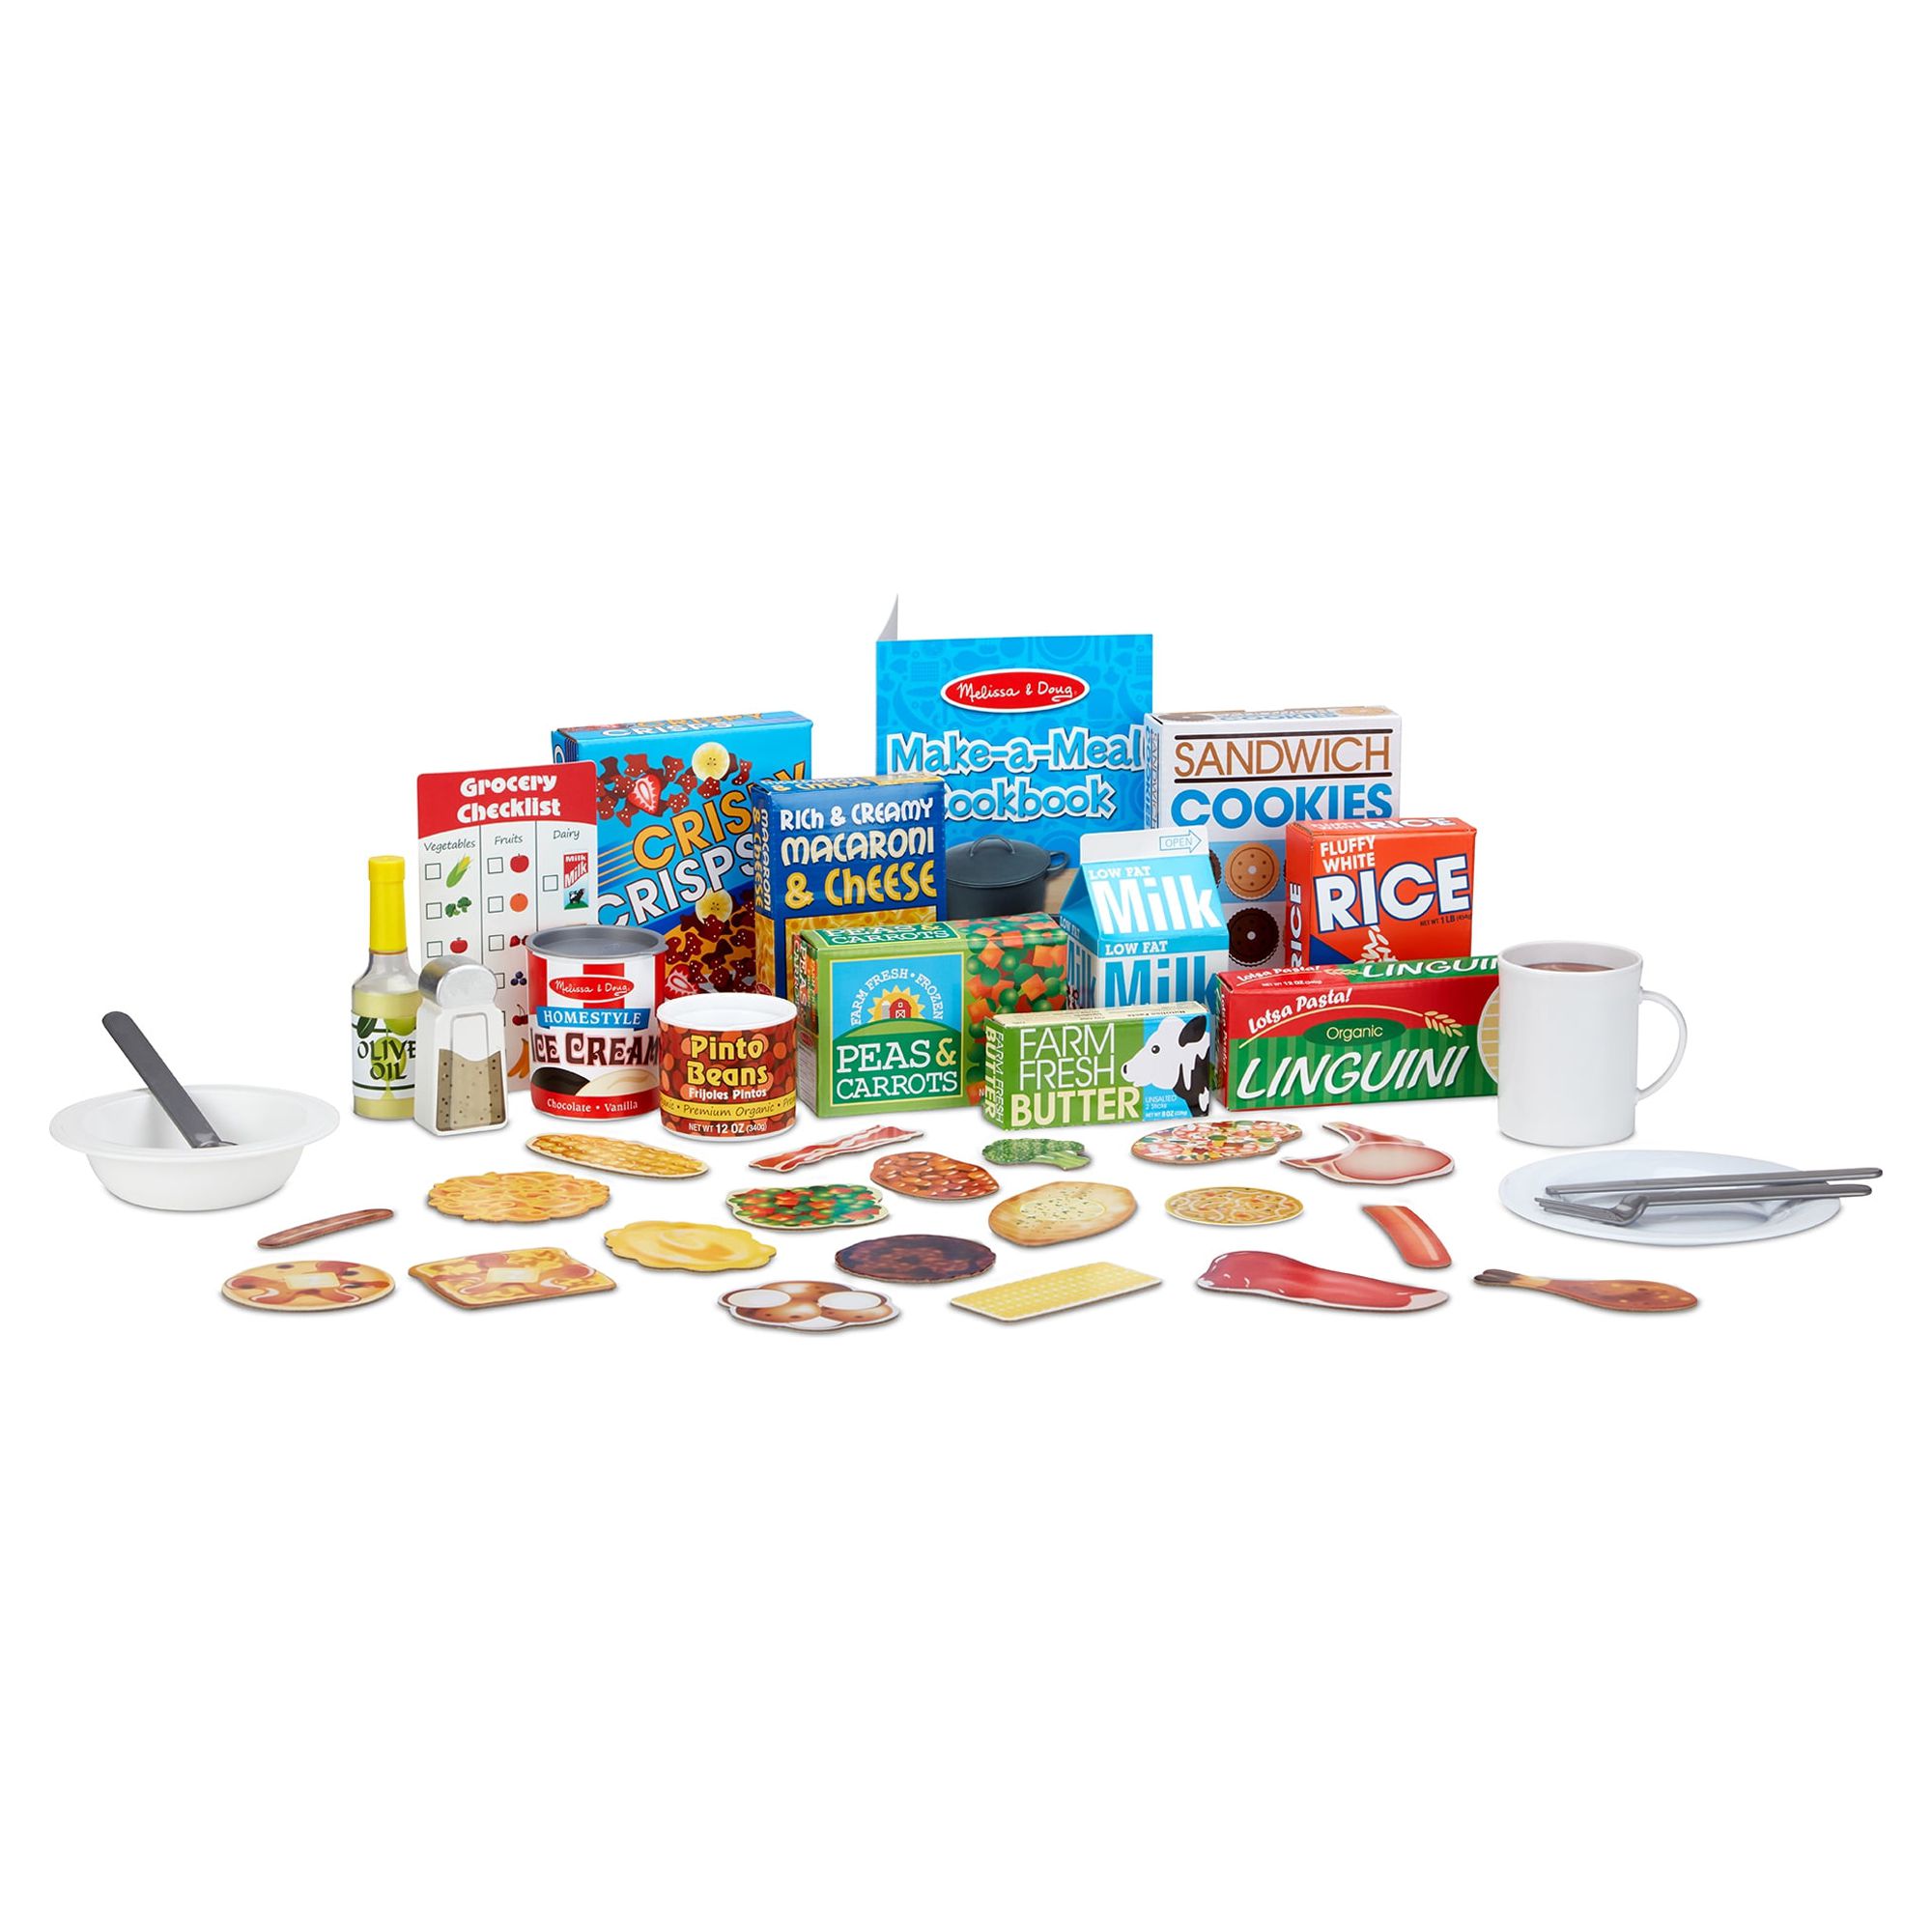 Melissa & Doug Deluxe Kitchen Collection Cooking & Play Food Set – 58 Pieces - image 1 of 10